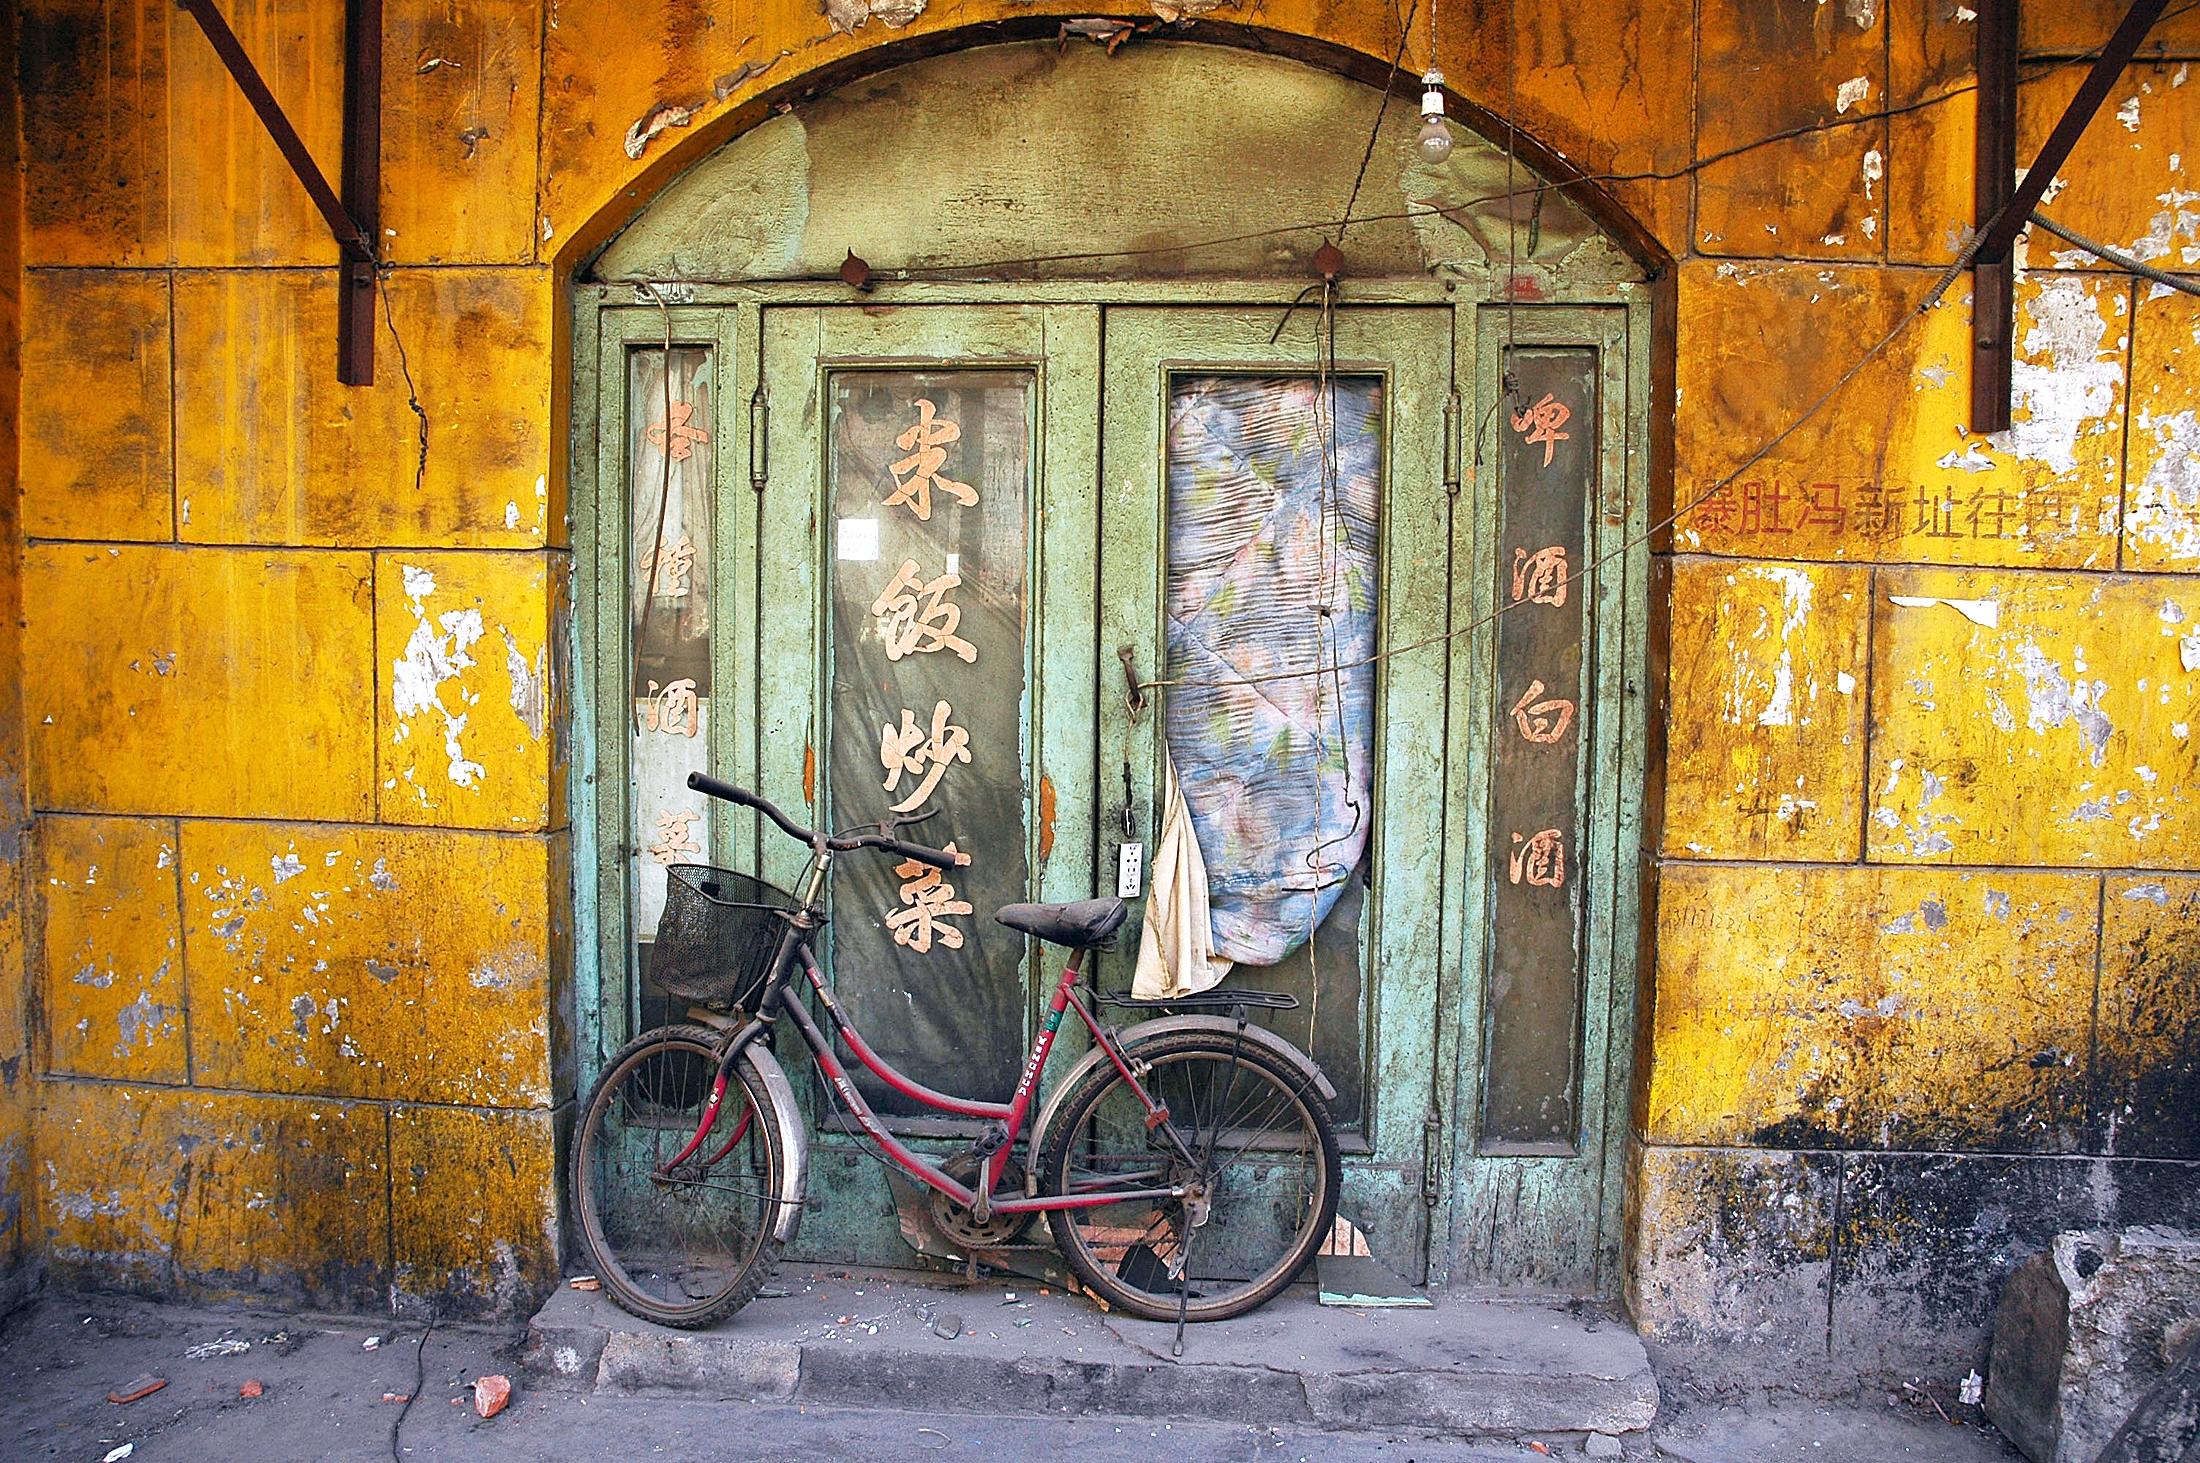 Joel Degrand Color Photograph - Hutong, Beijing, China, Photograph, Archival Ink Jet